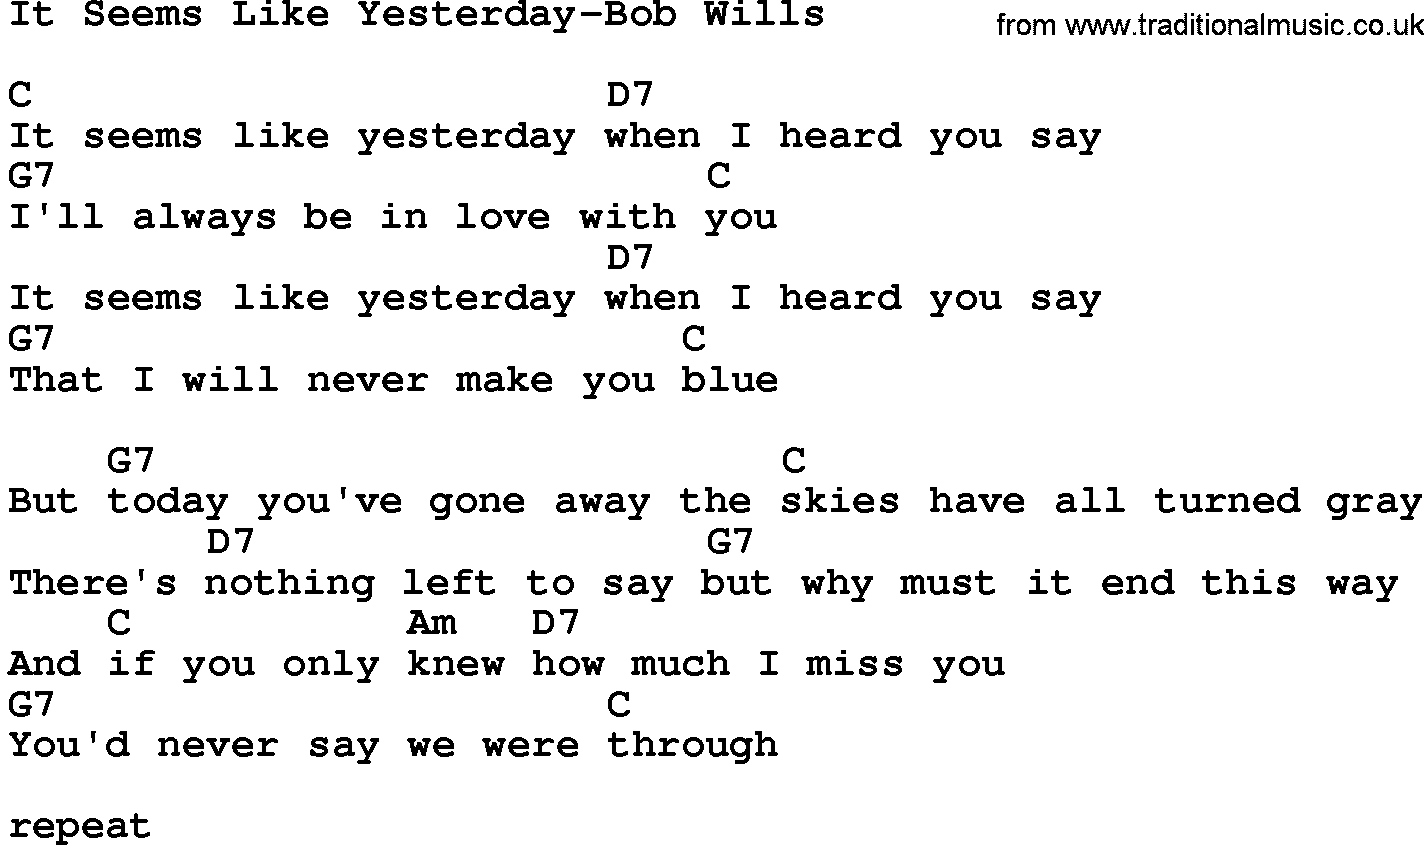 Country music song: It Seems Like Yesterday-Bob Wills lyrics and chords